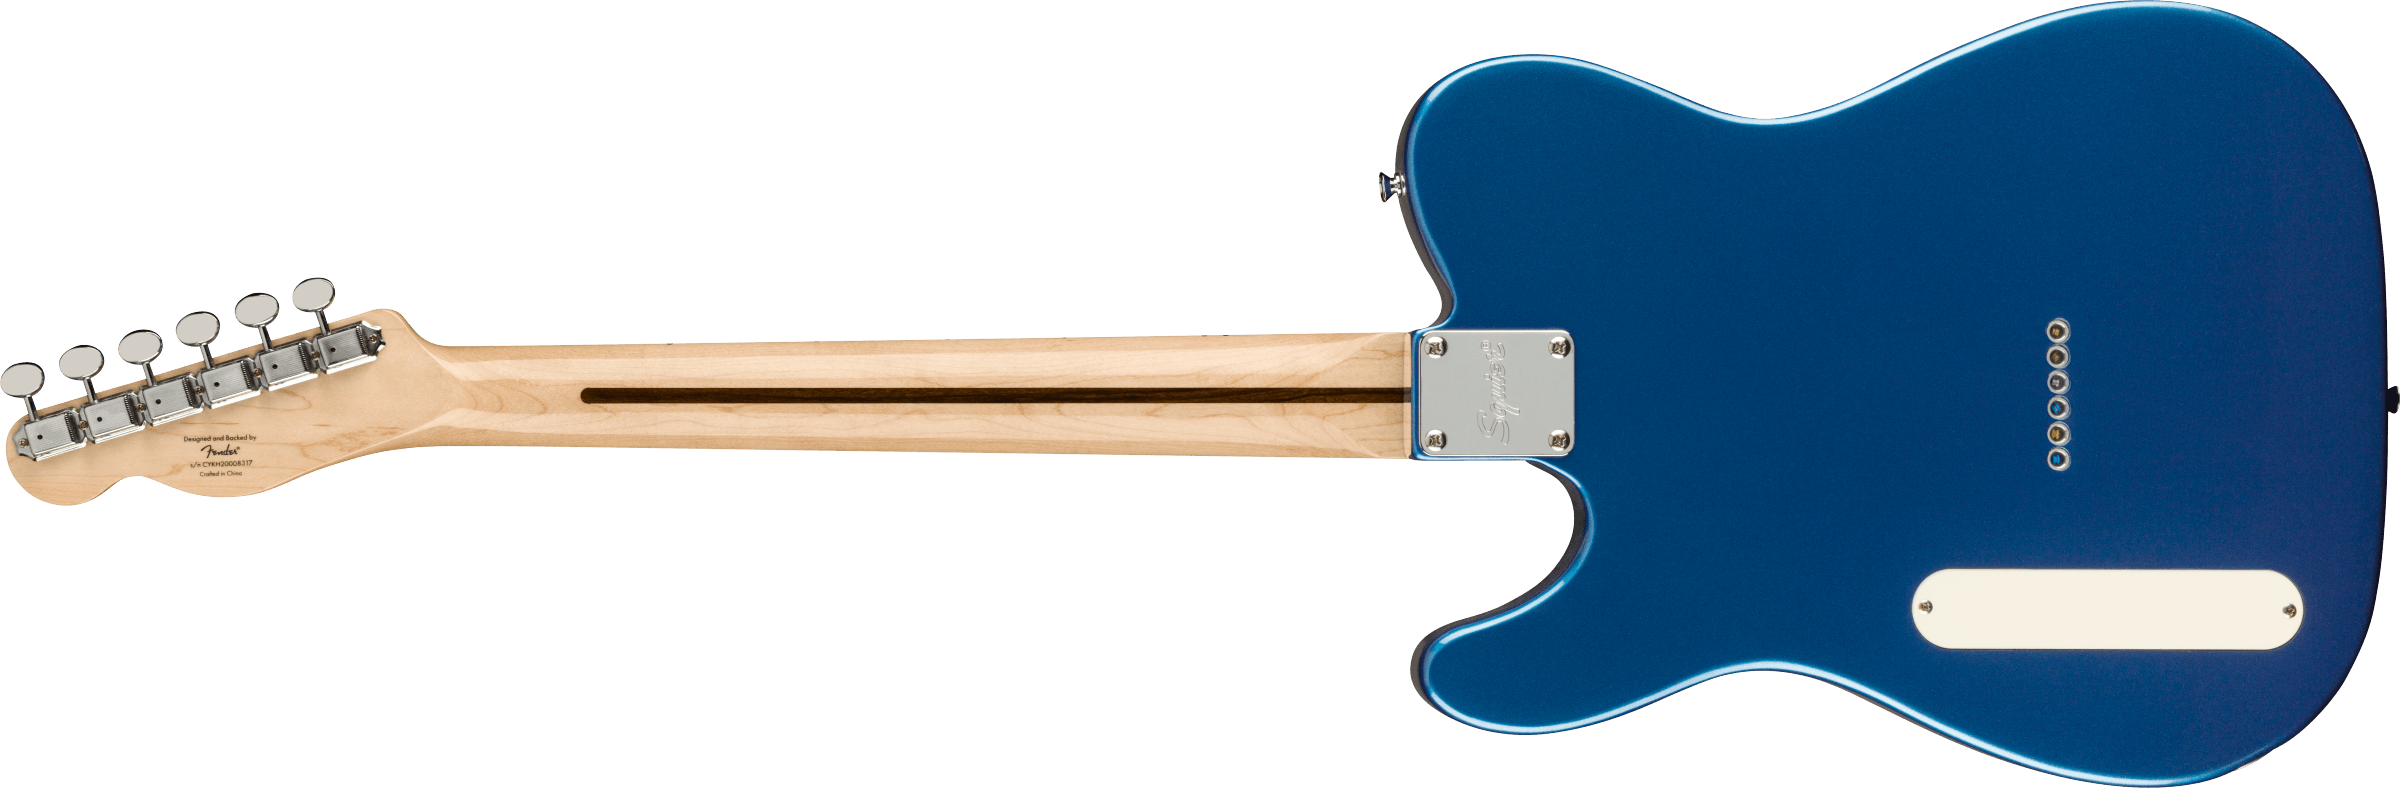 Squier Paranormal Cabronita Telecaster Thinline Maple Fingerboard Parchment Pickguard, Lake Placid Blue F-0377020502